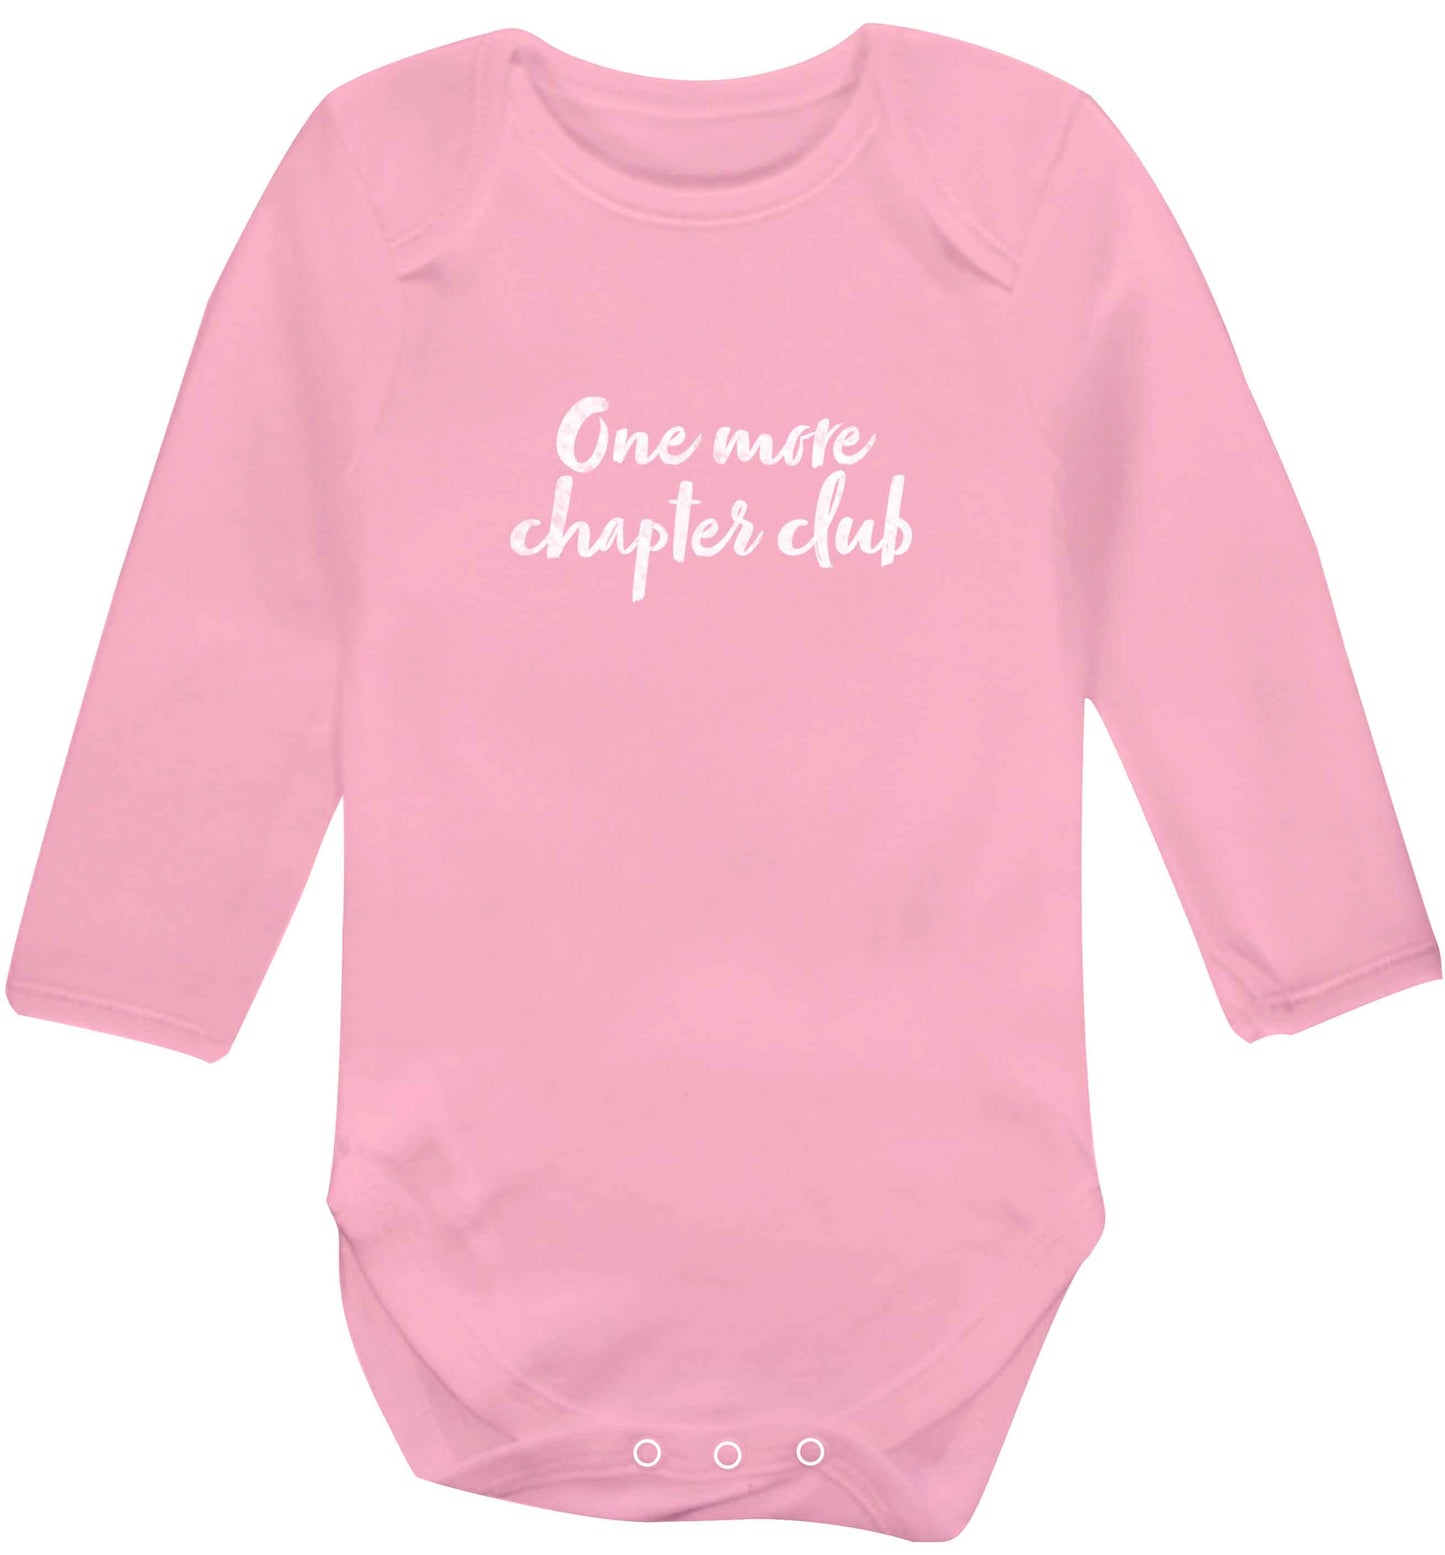 One more chapter club Kit baby vest long sleeved pale pink 6-12 months